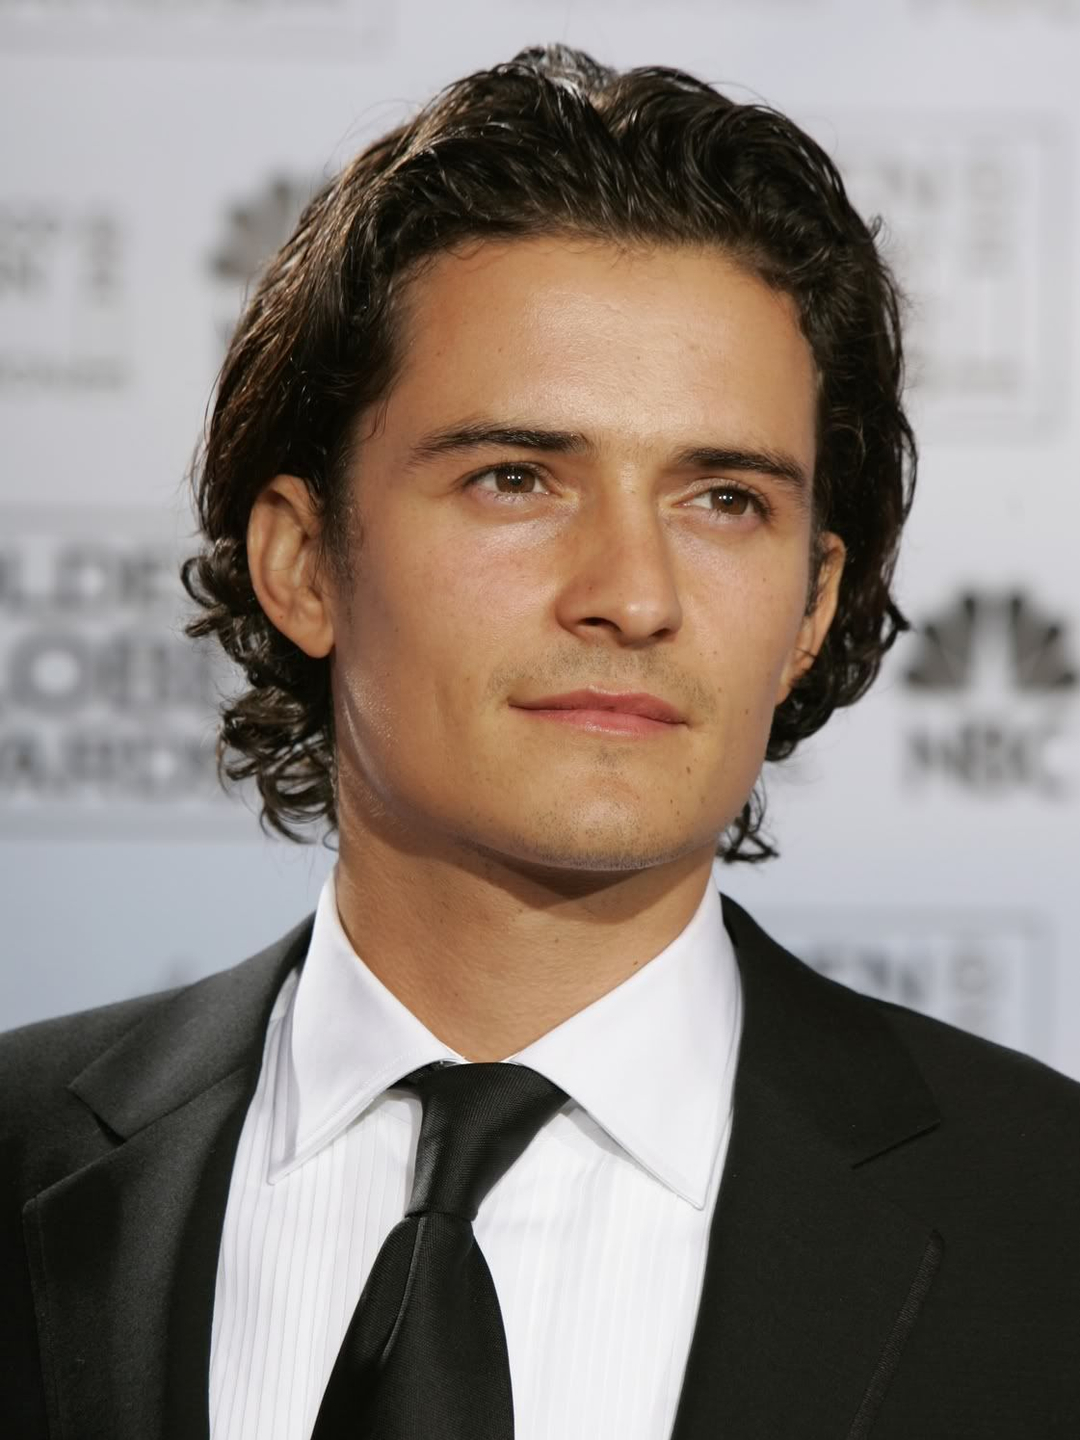 Orlando Bloom who is his father